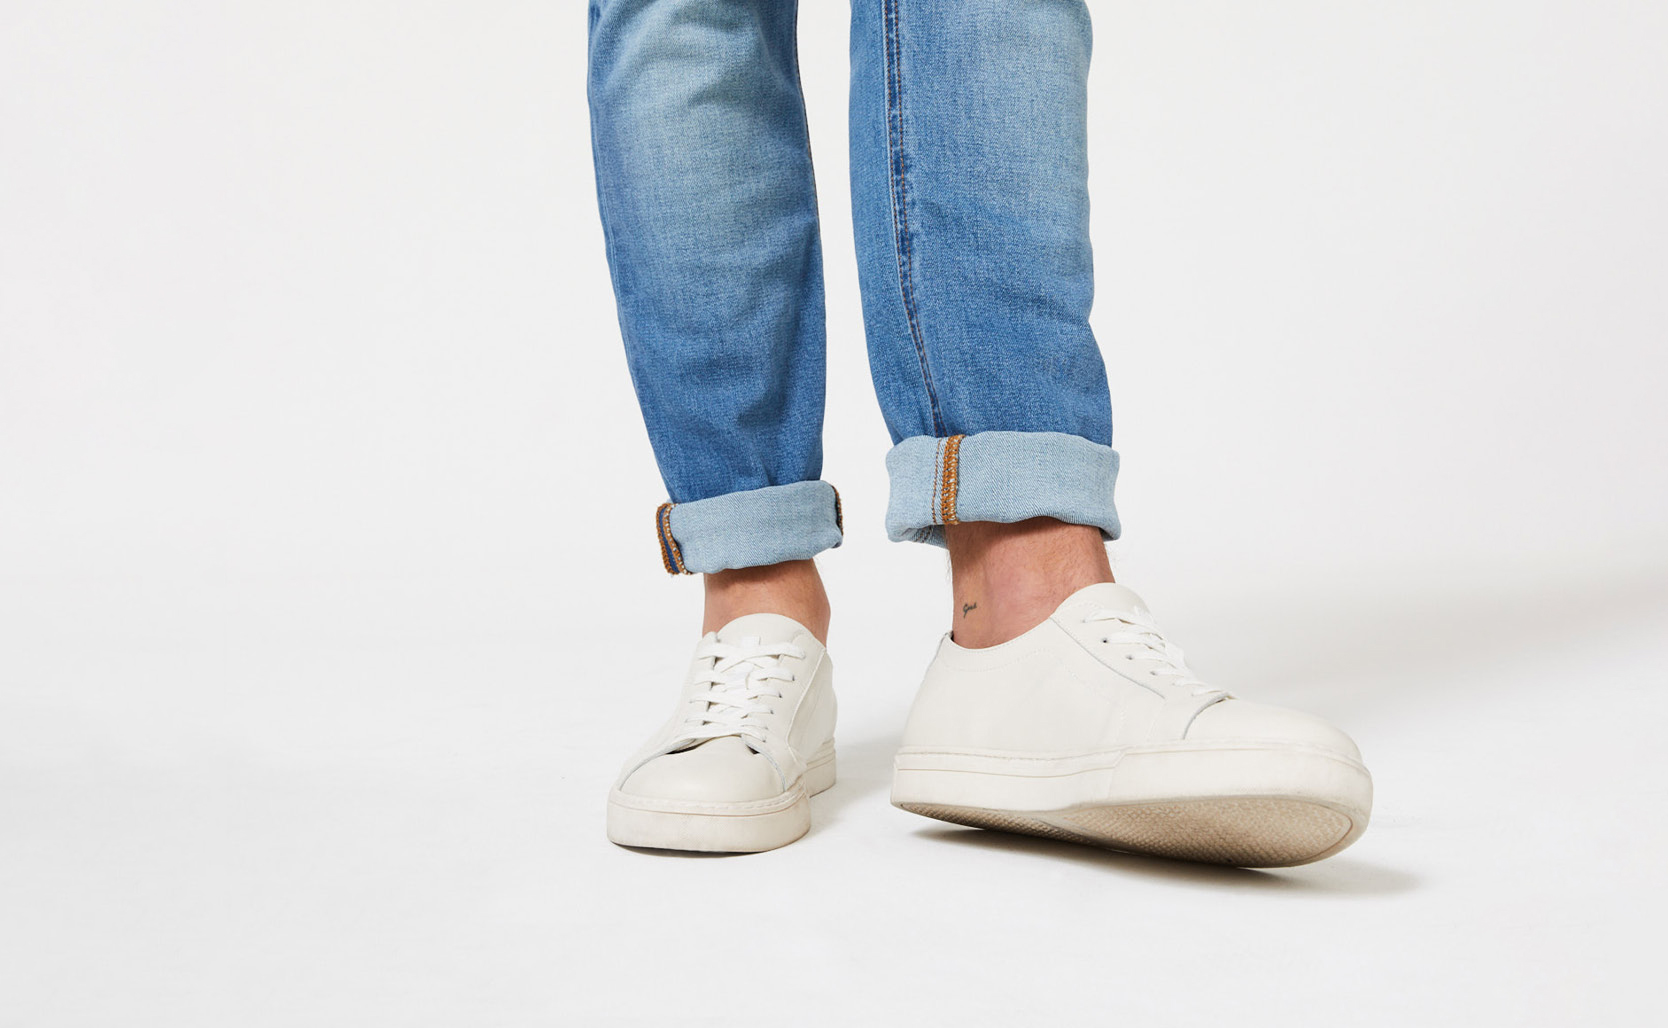 How to Cuff Jeans | Guide